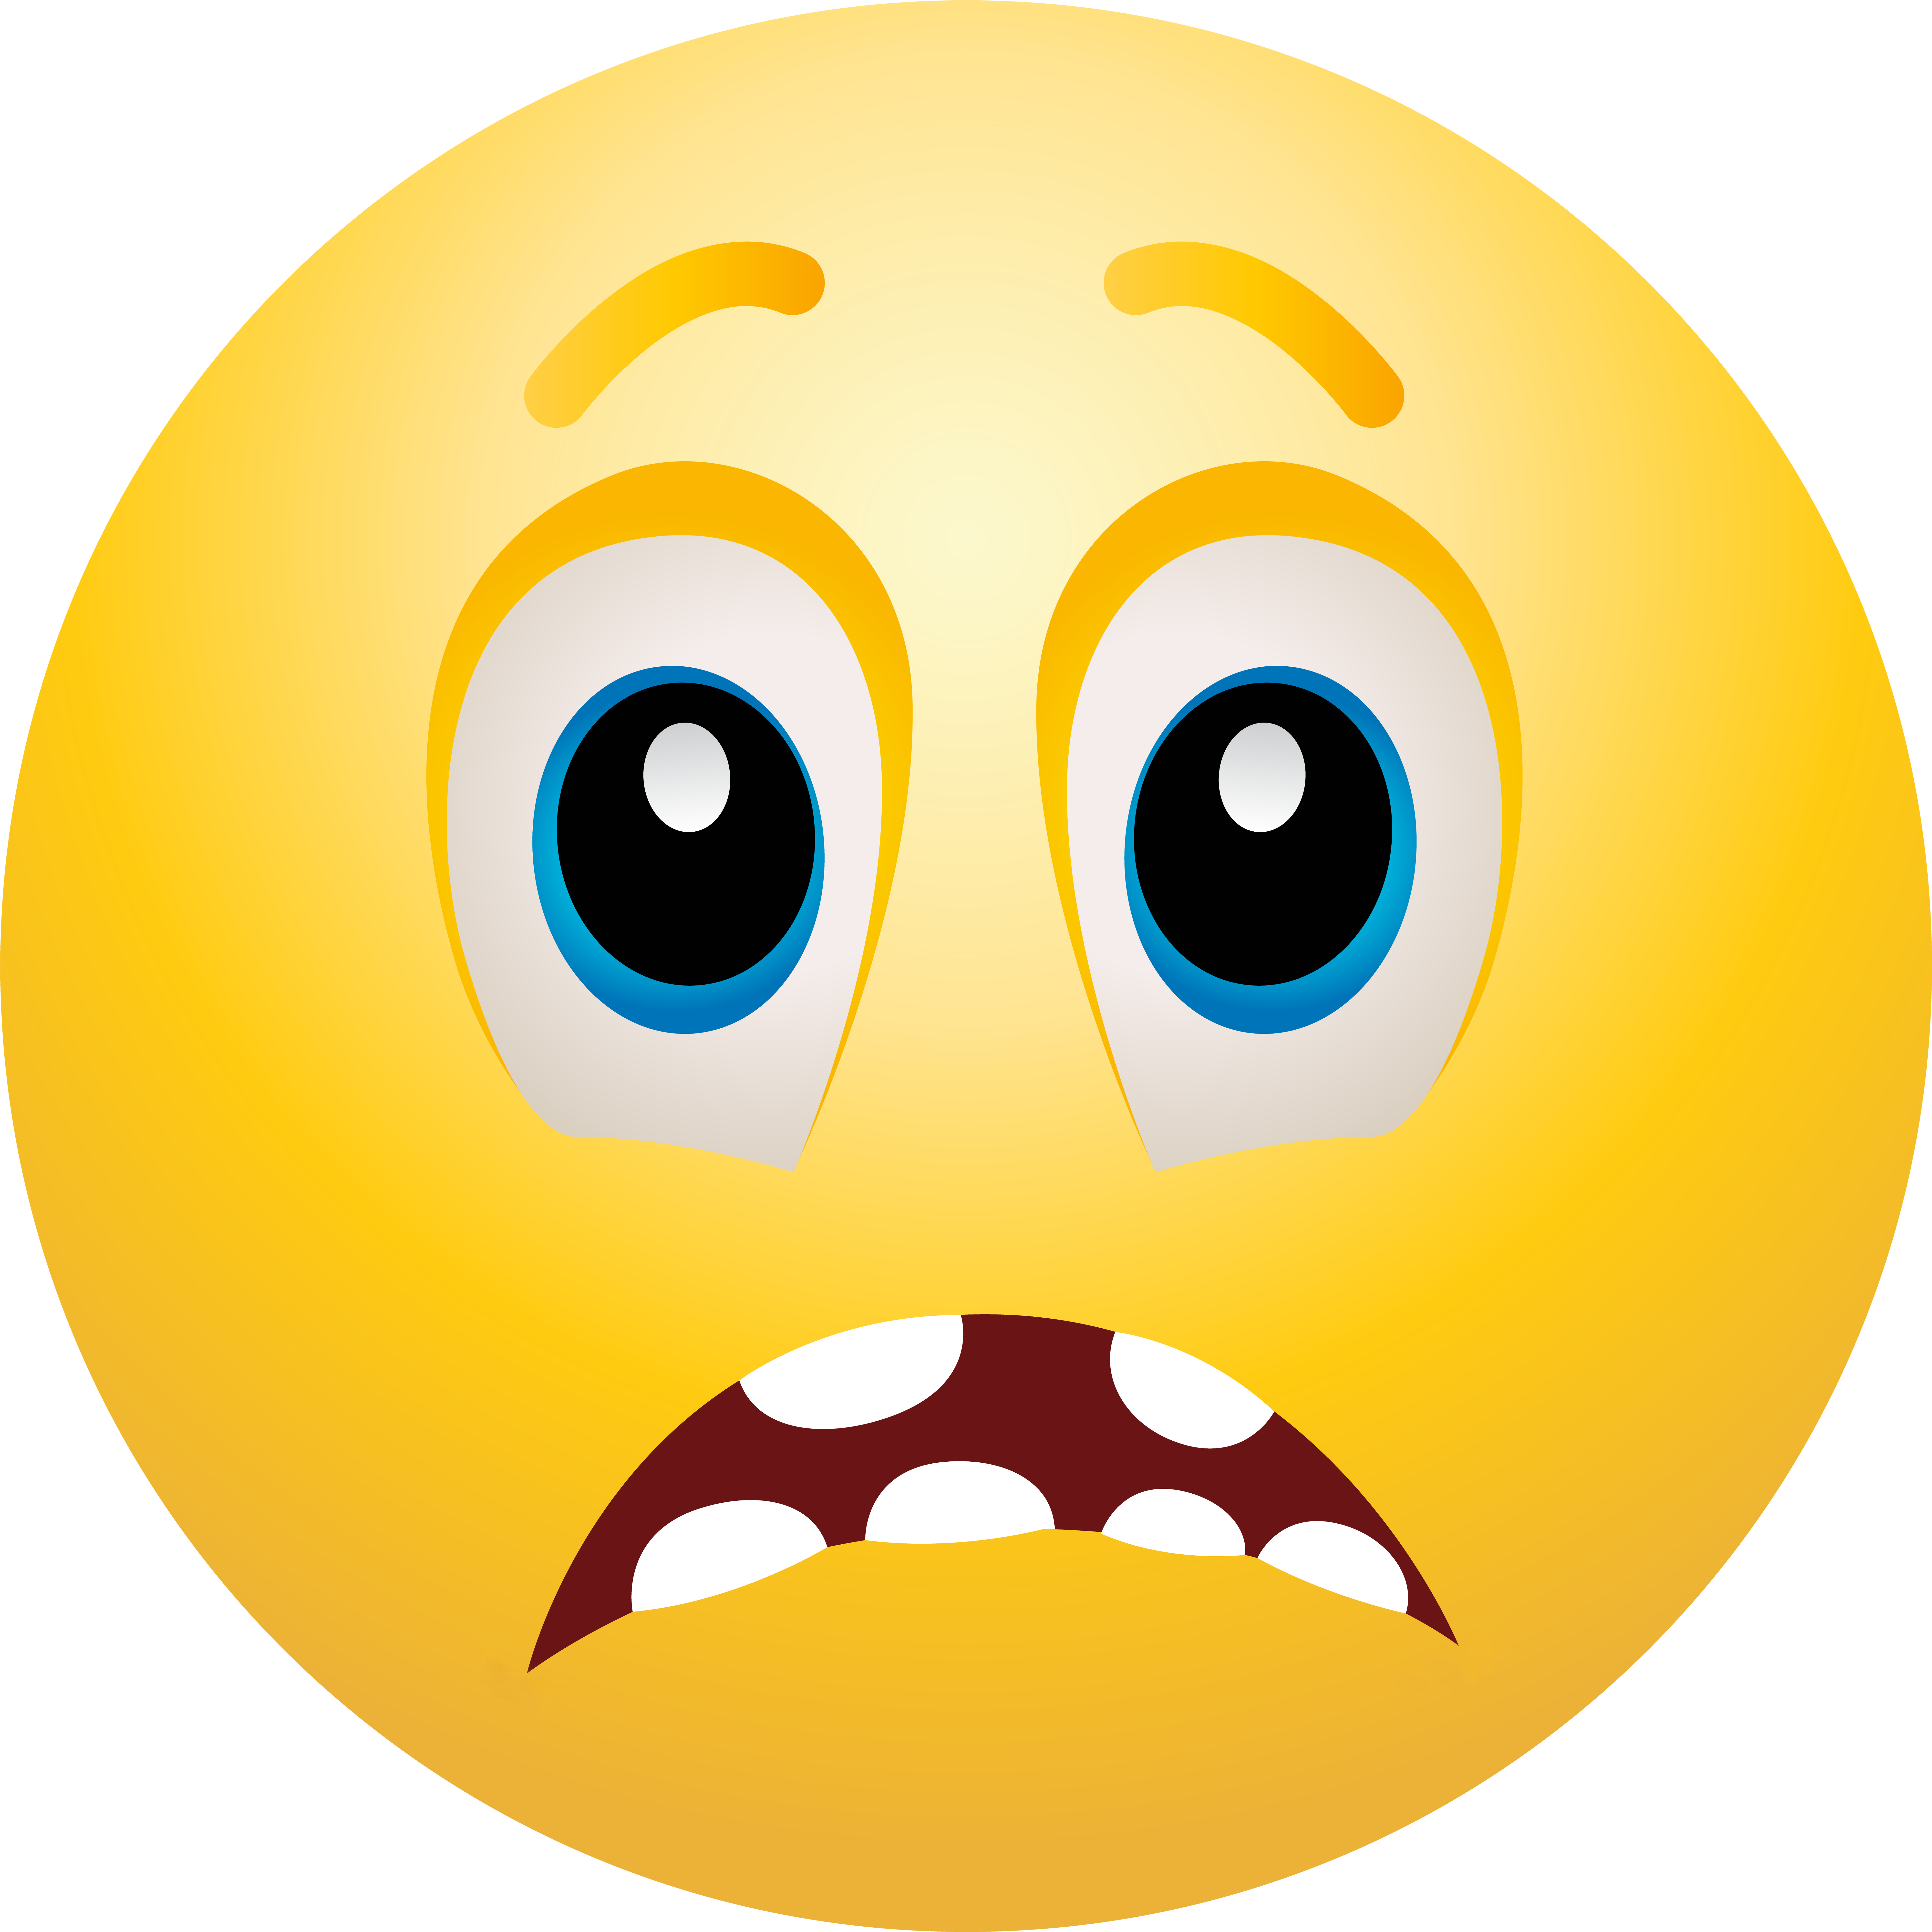 Scared Face Scared Emoticon Clip Art Web Clipart Png - Scared Face Scared Emoticon Clip Art Web Clipart Png (8000x8000)